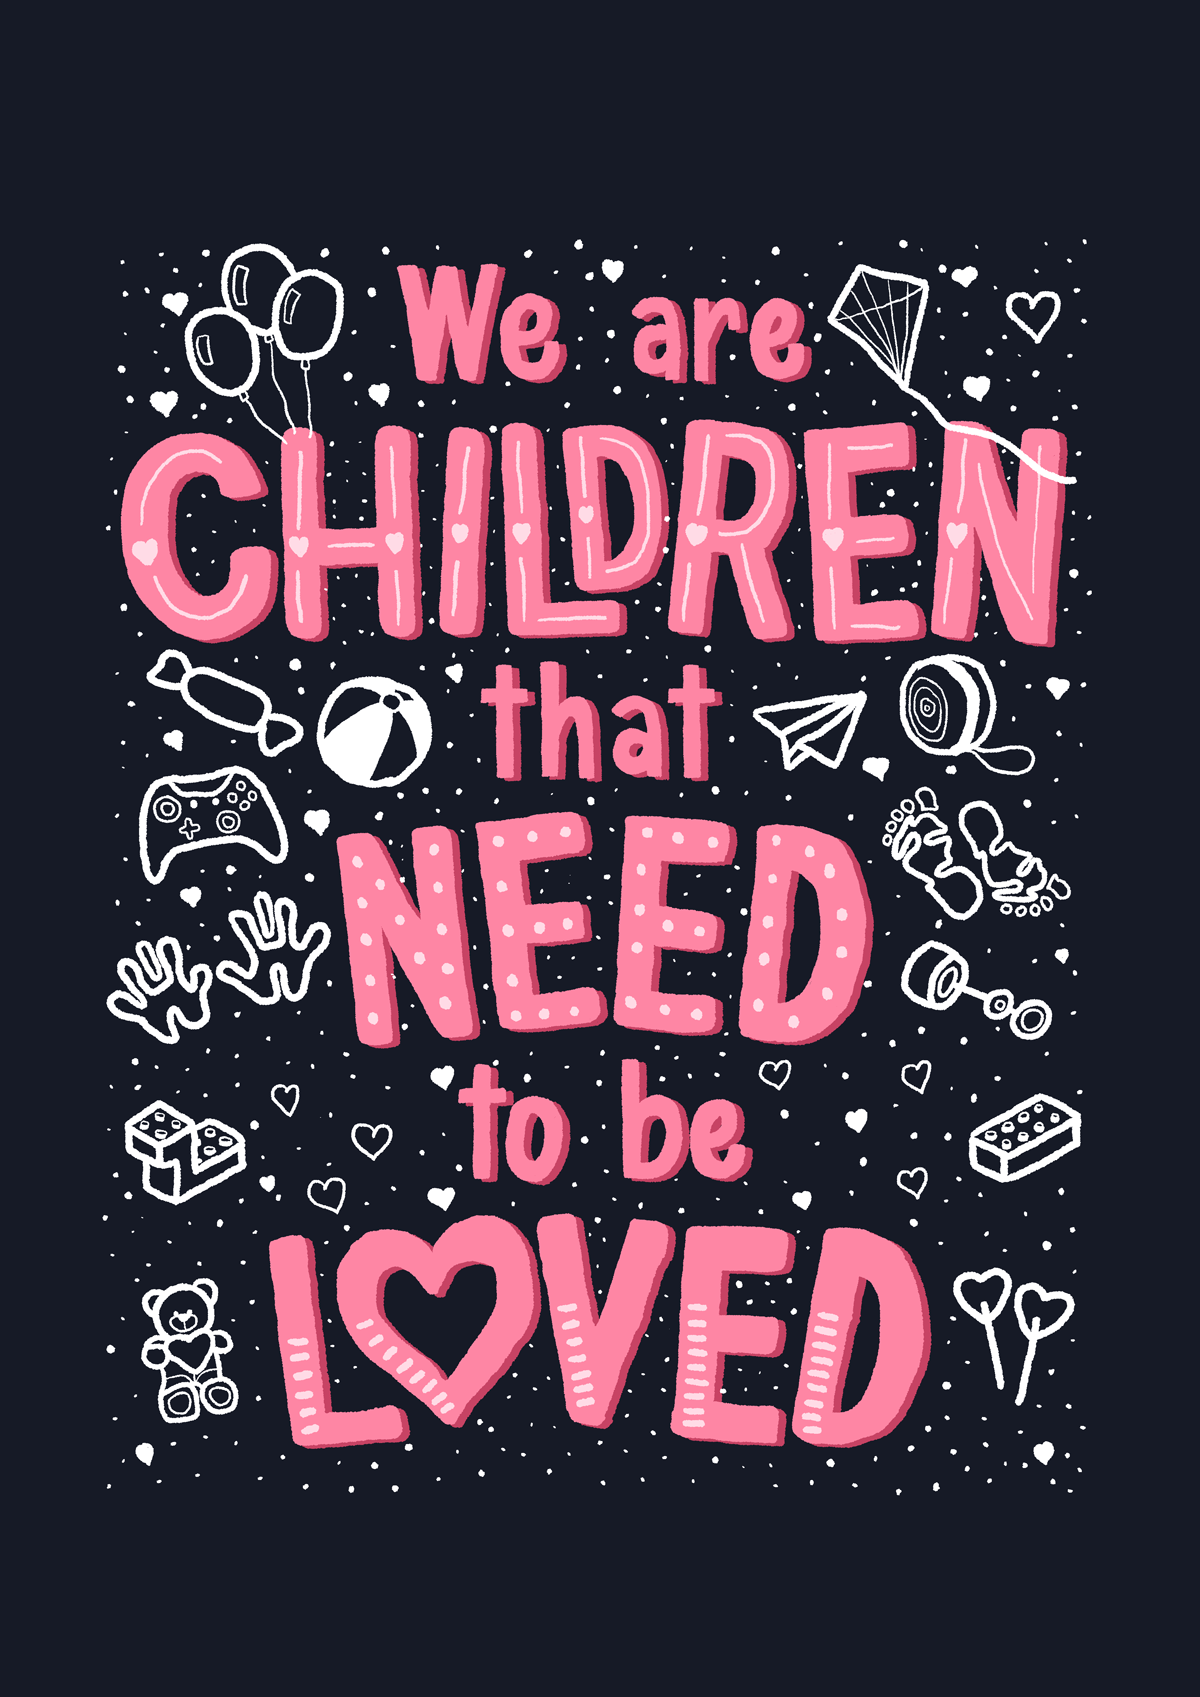 We Are Children That Need To Be Loved - P!nk